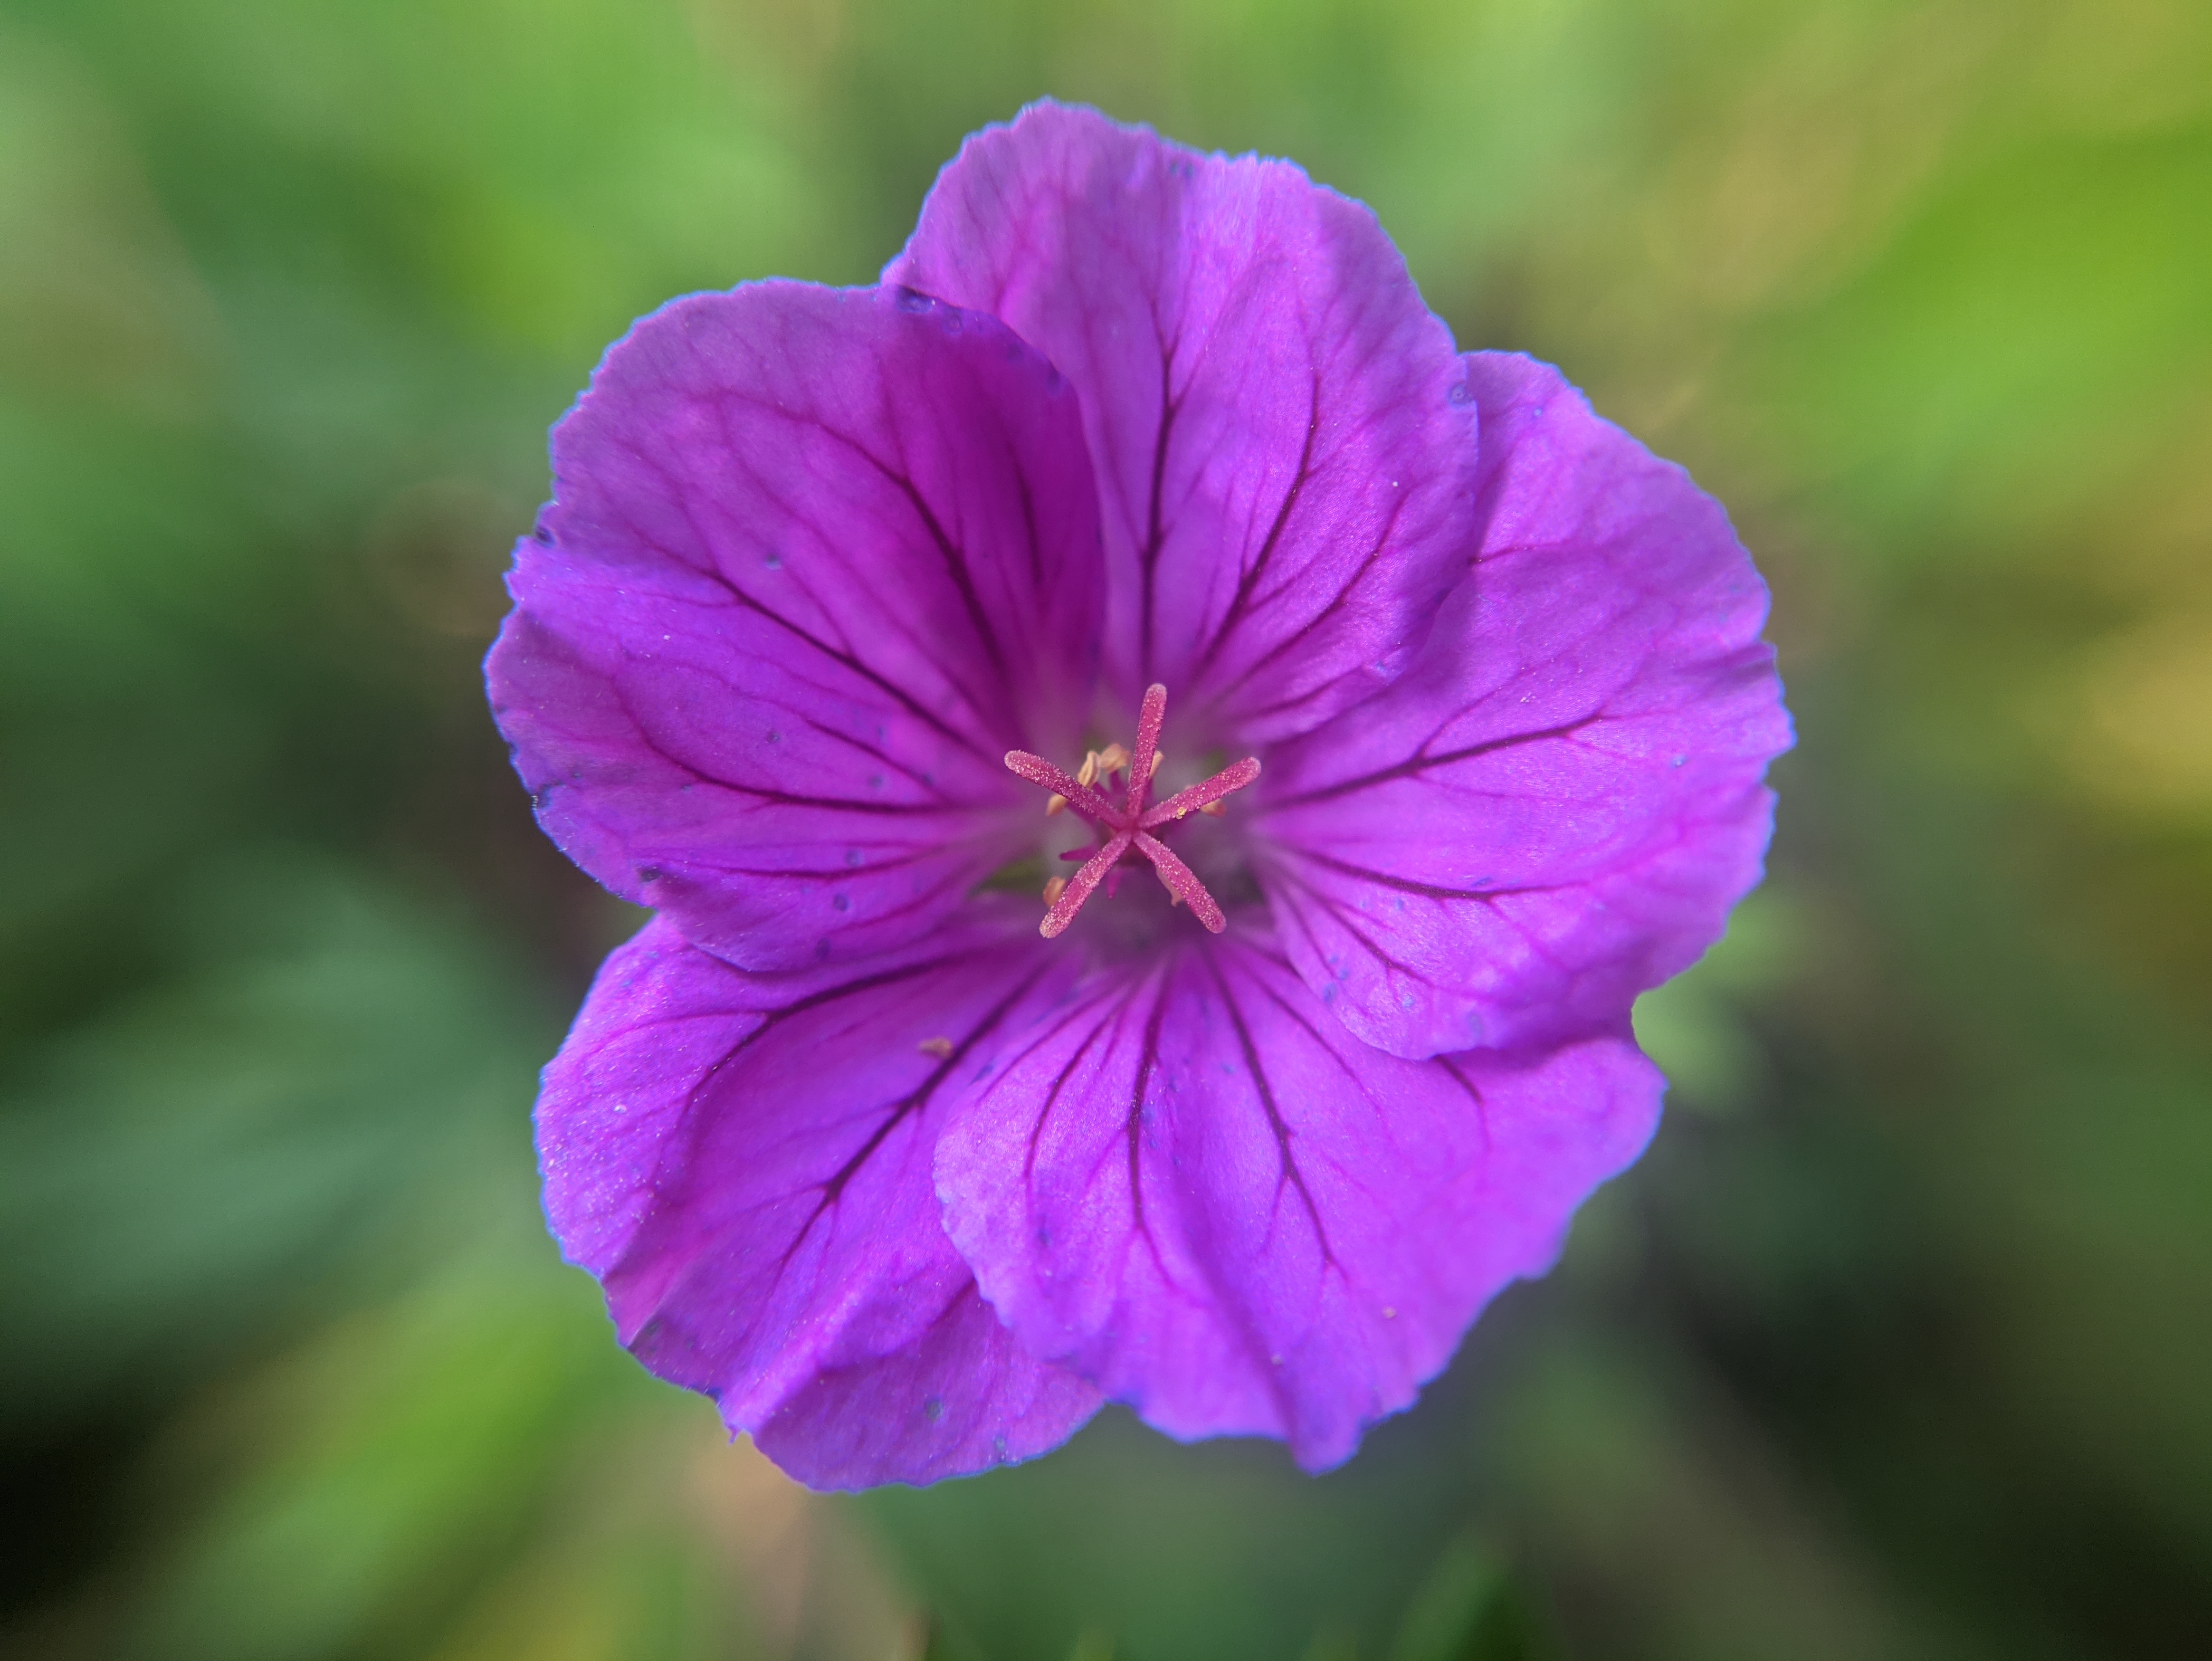 Flowers Nature Photography Blurry Background Purple Flowers 4656x3496